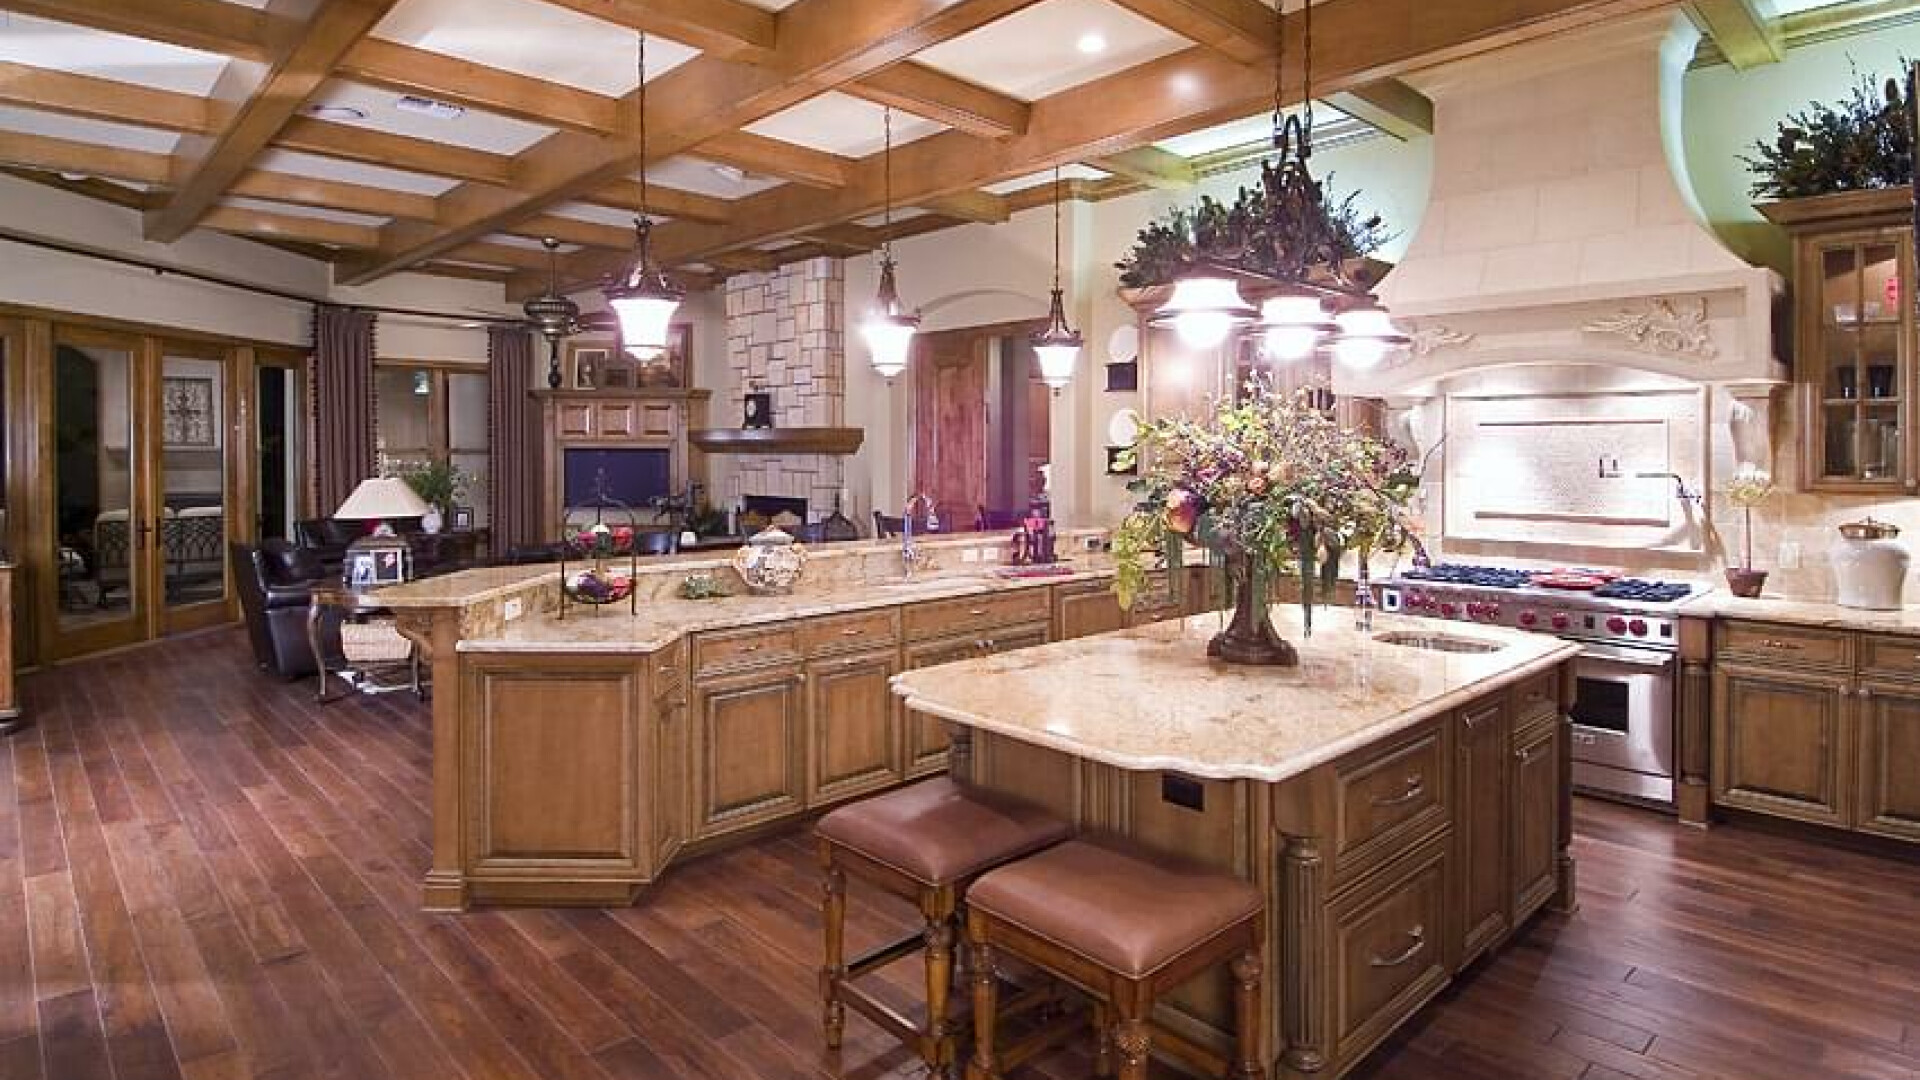 Luxury kitchen featuring detailed wooden ceiling beams, Tampa FL